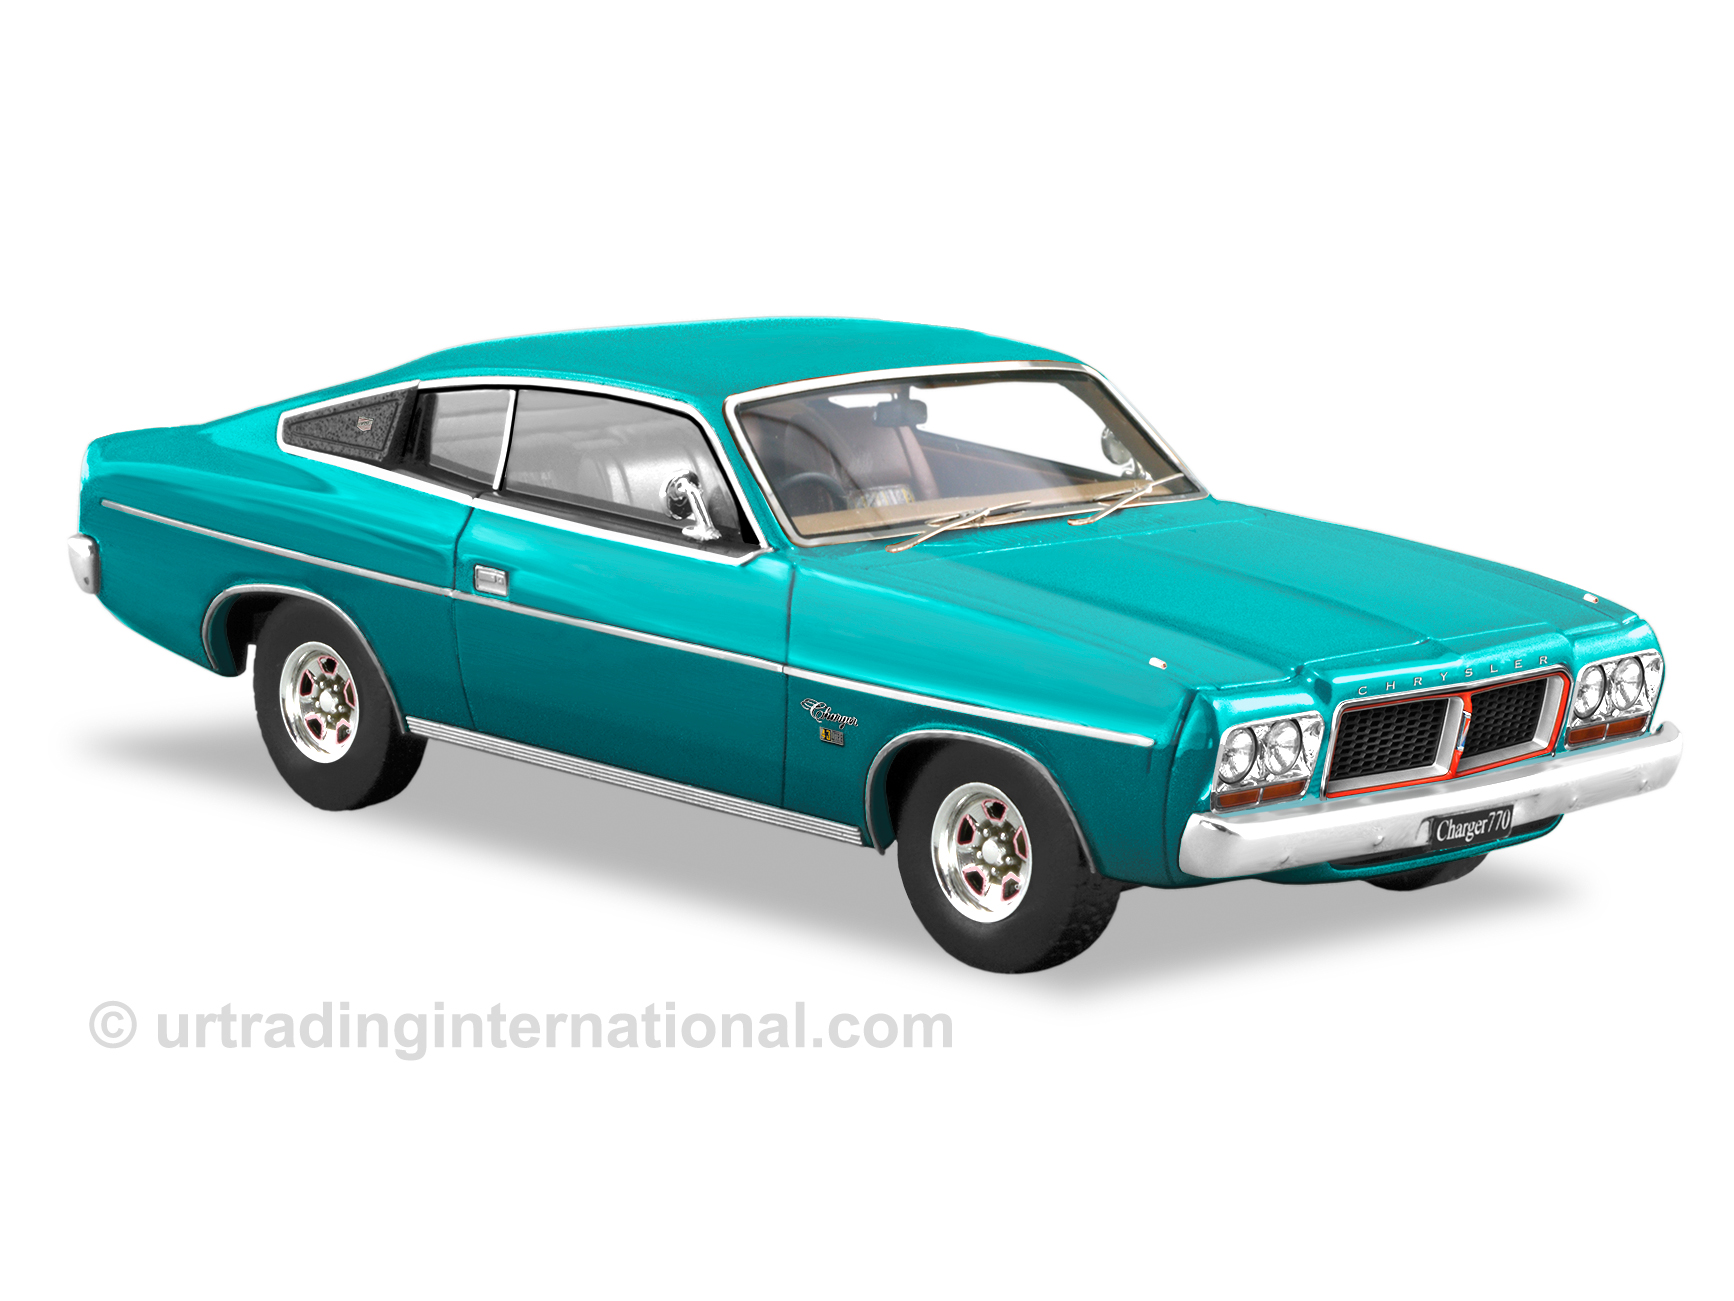 1976 CL Valiant Charger 770 – Turquoise